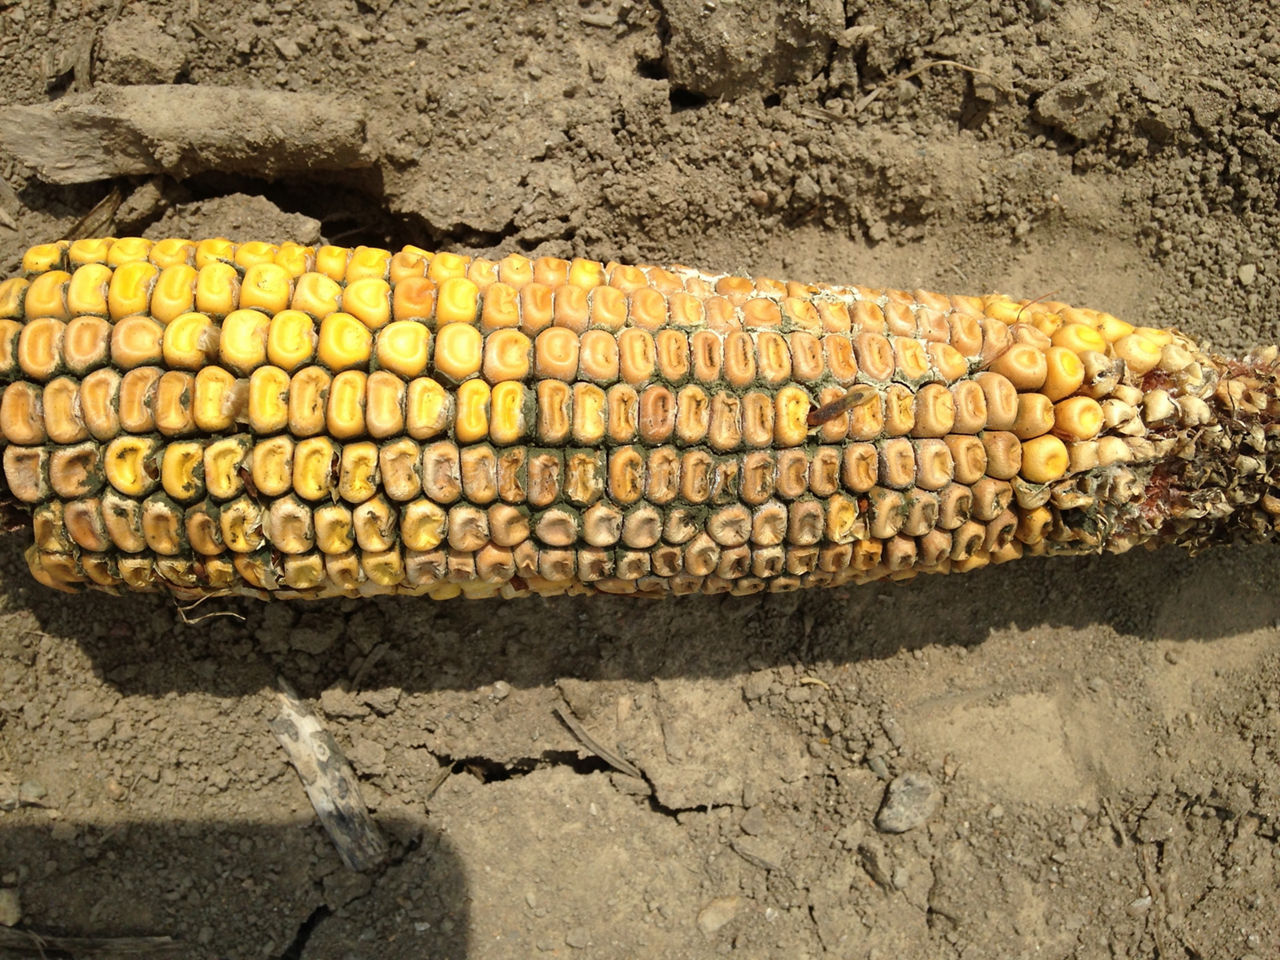 Figure 1. Corn infected with Aspergillus eat rot.